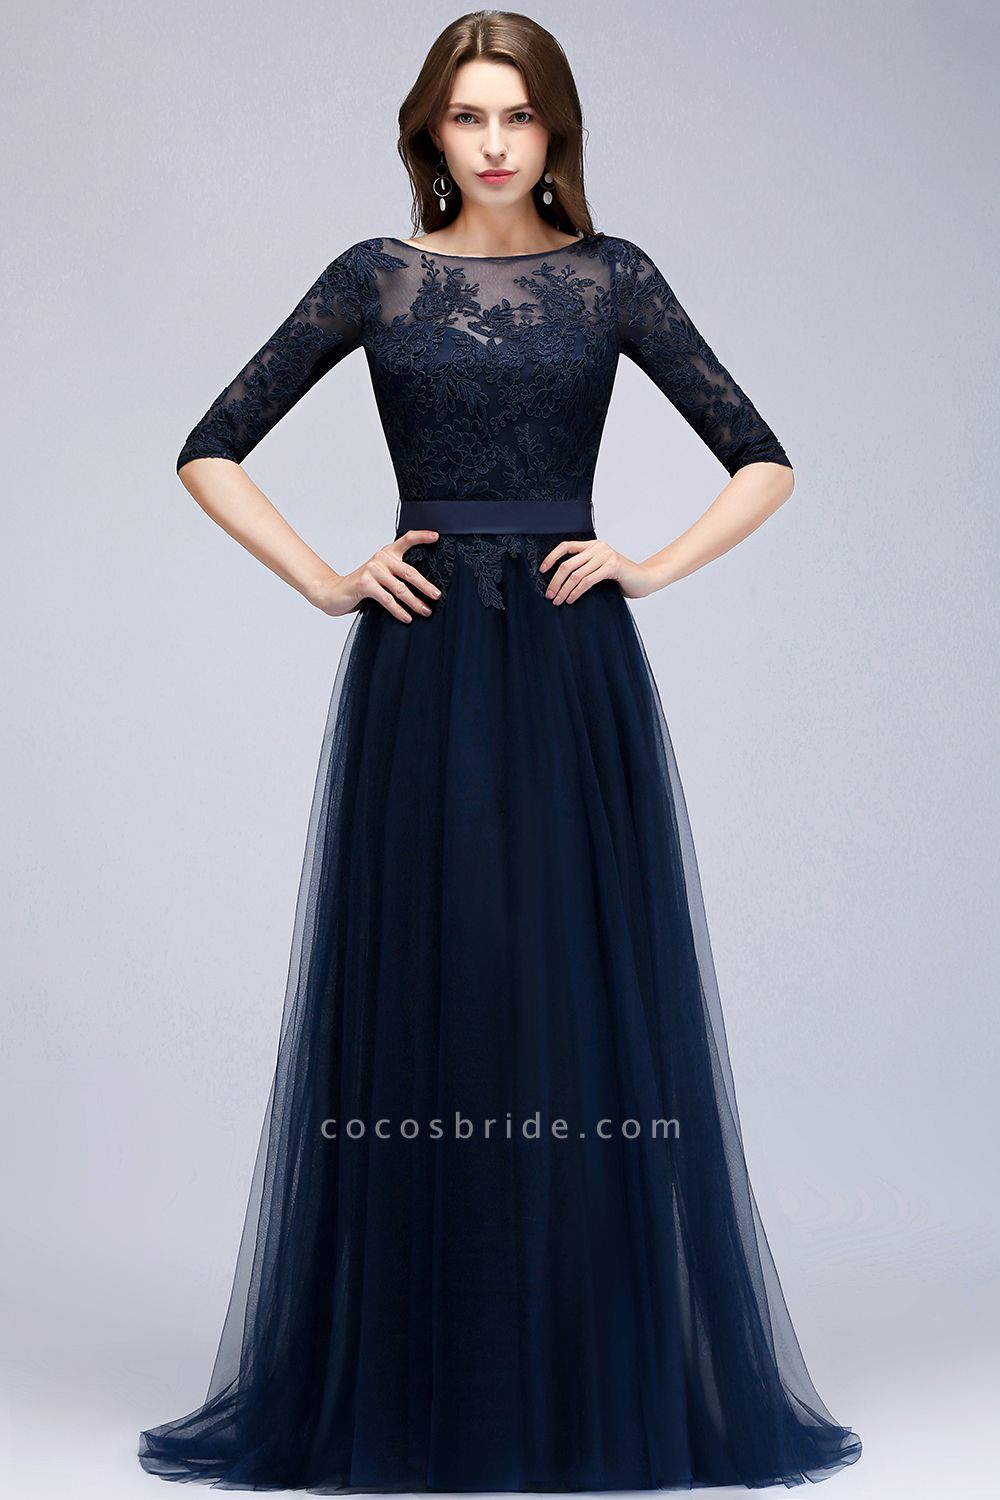 Elegant Navy Half-Sleeves Lace Bridesmaid Dresses with Appliques